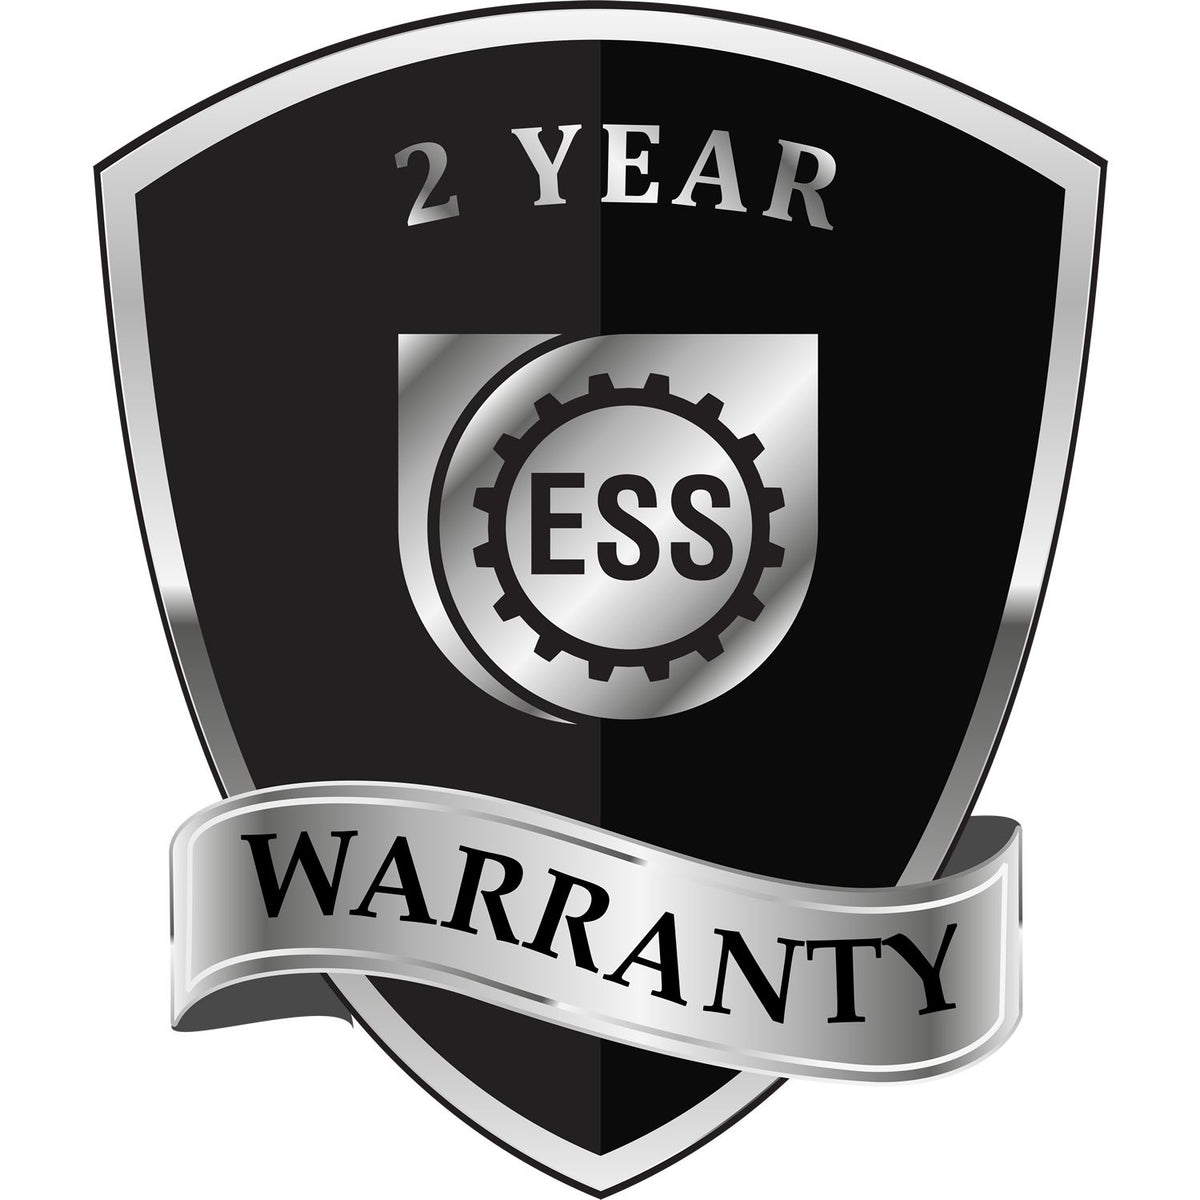 A badge or emblem showing a warranty icon for the Soft Arkansas Professional Engineer Seal